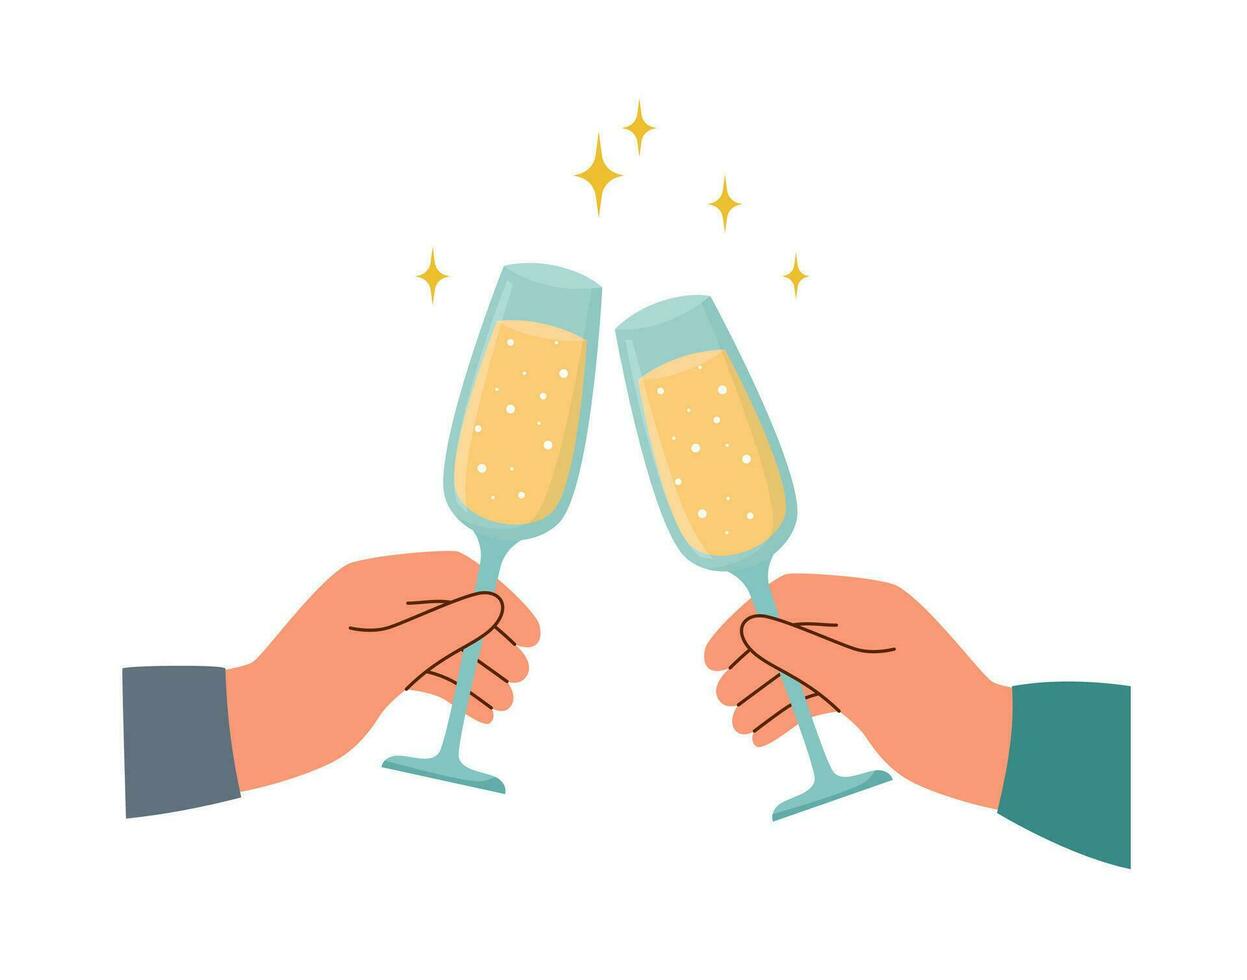 Two campagne flutes in the hands vector